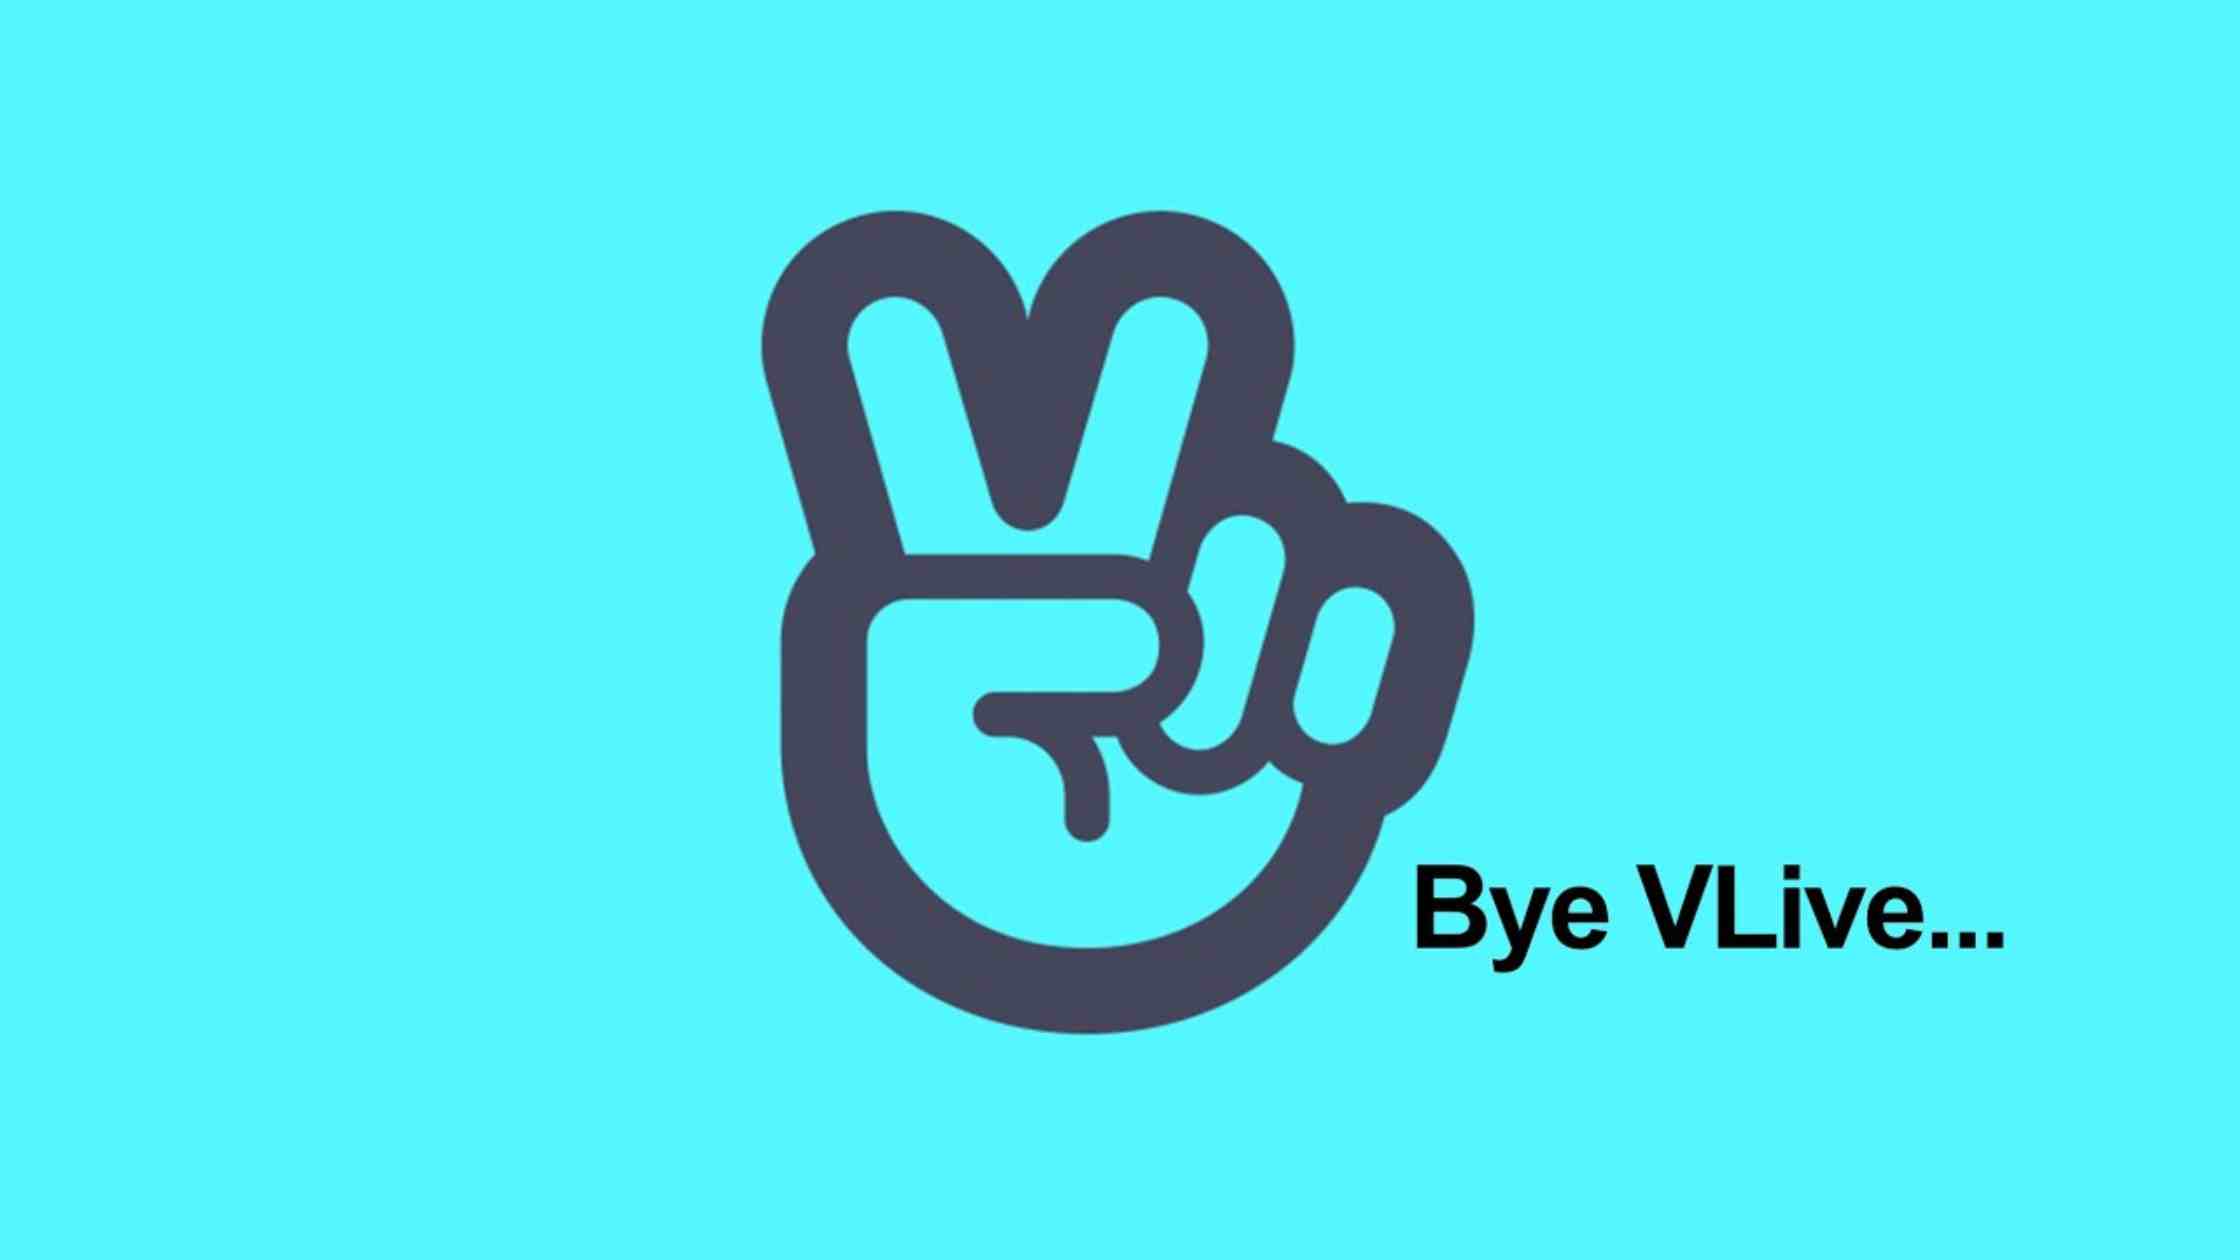 Is VLive shutting down